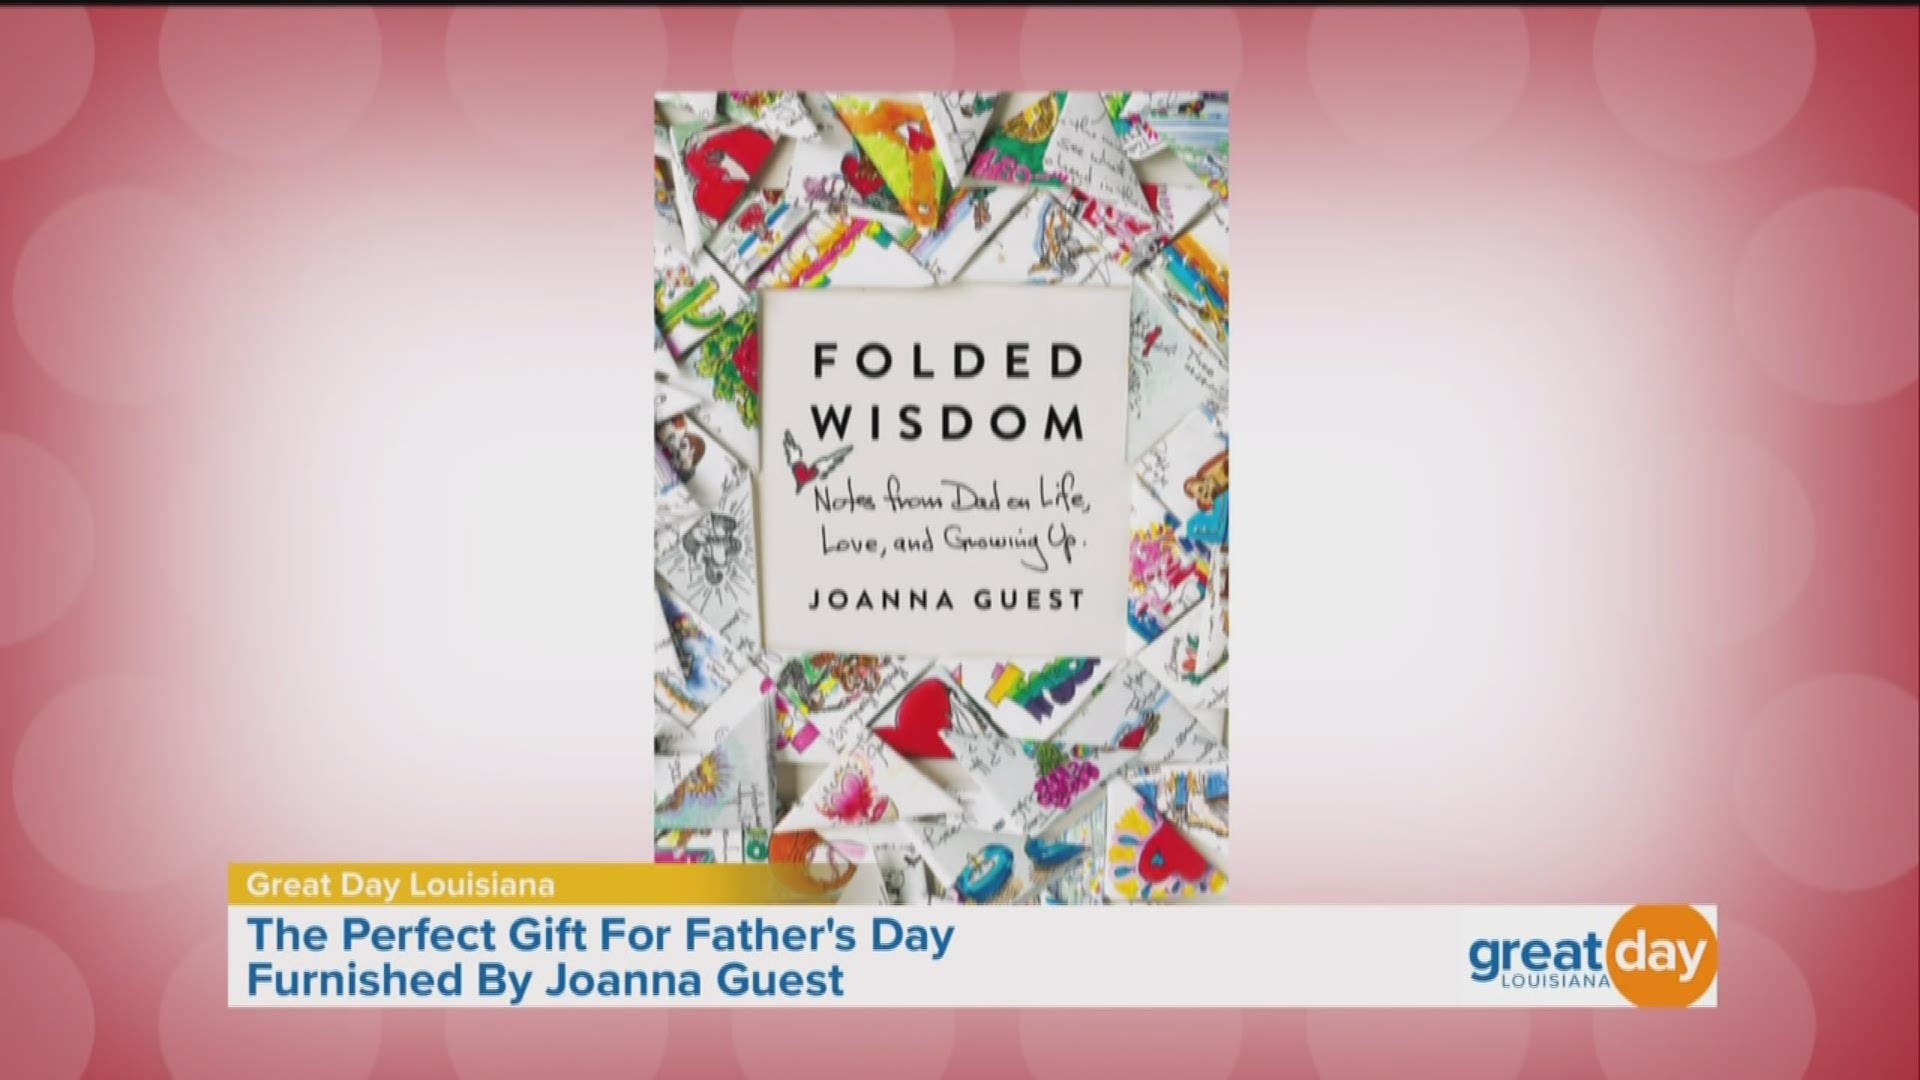 Joanna Guest, author of "Folder Wisdom: Notes from Dad on Life, Love and Growing Up," joins us to talk about the inspiration behind her book.